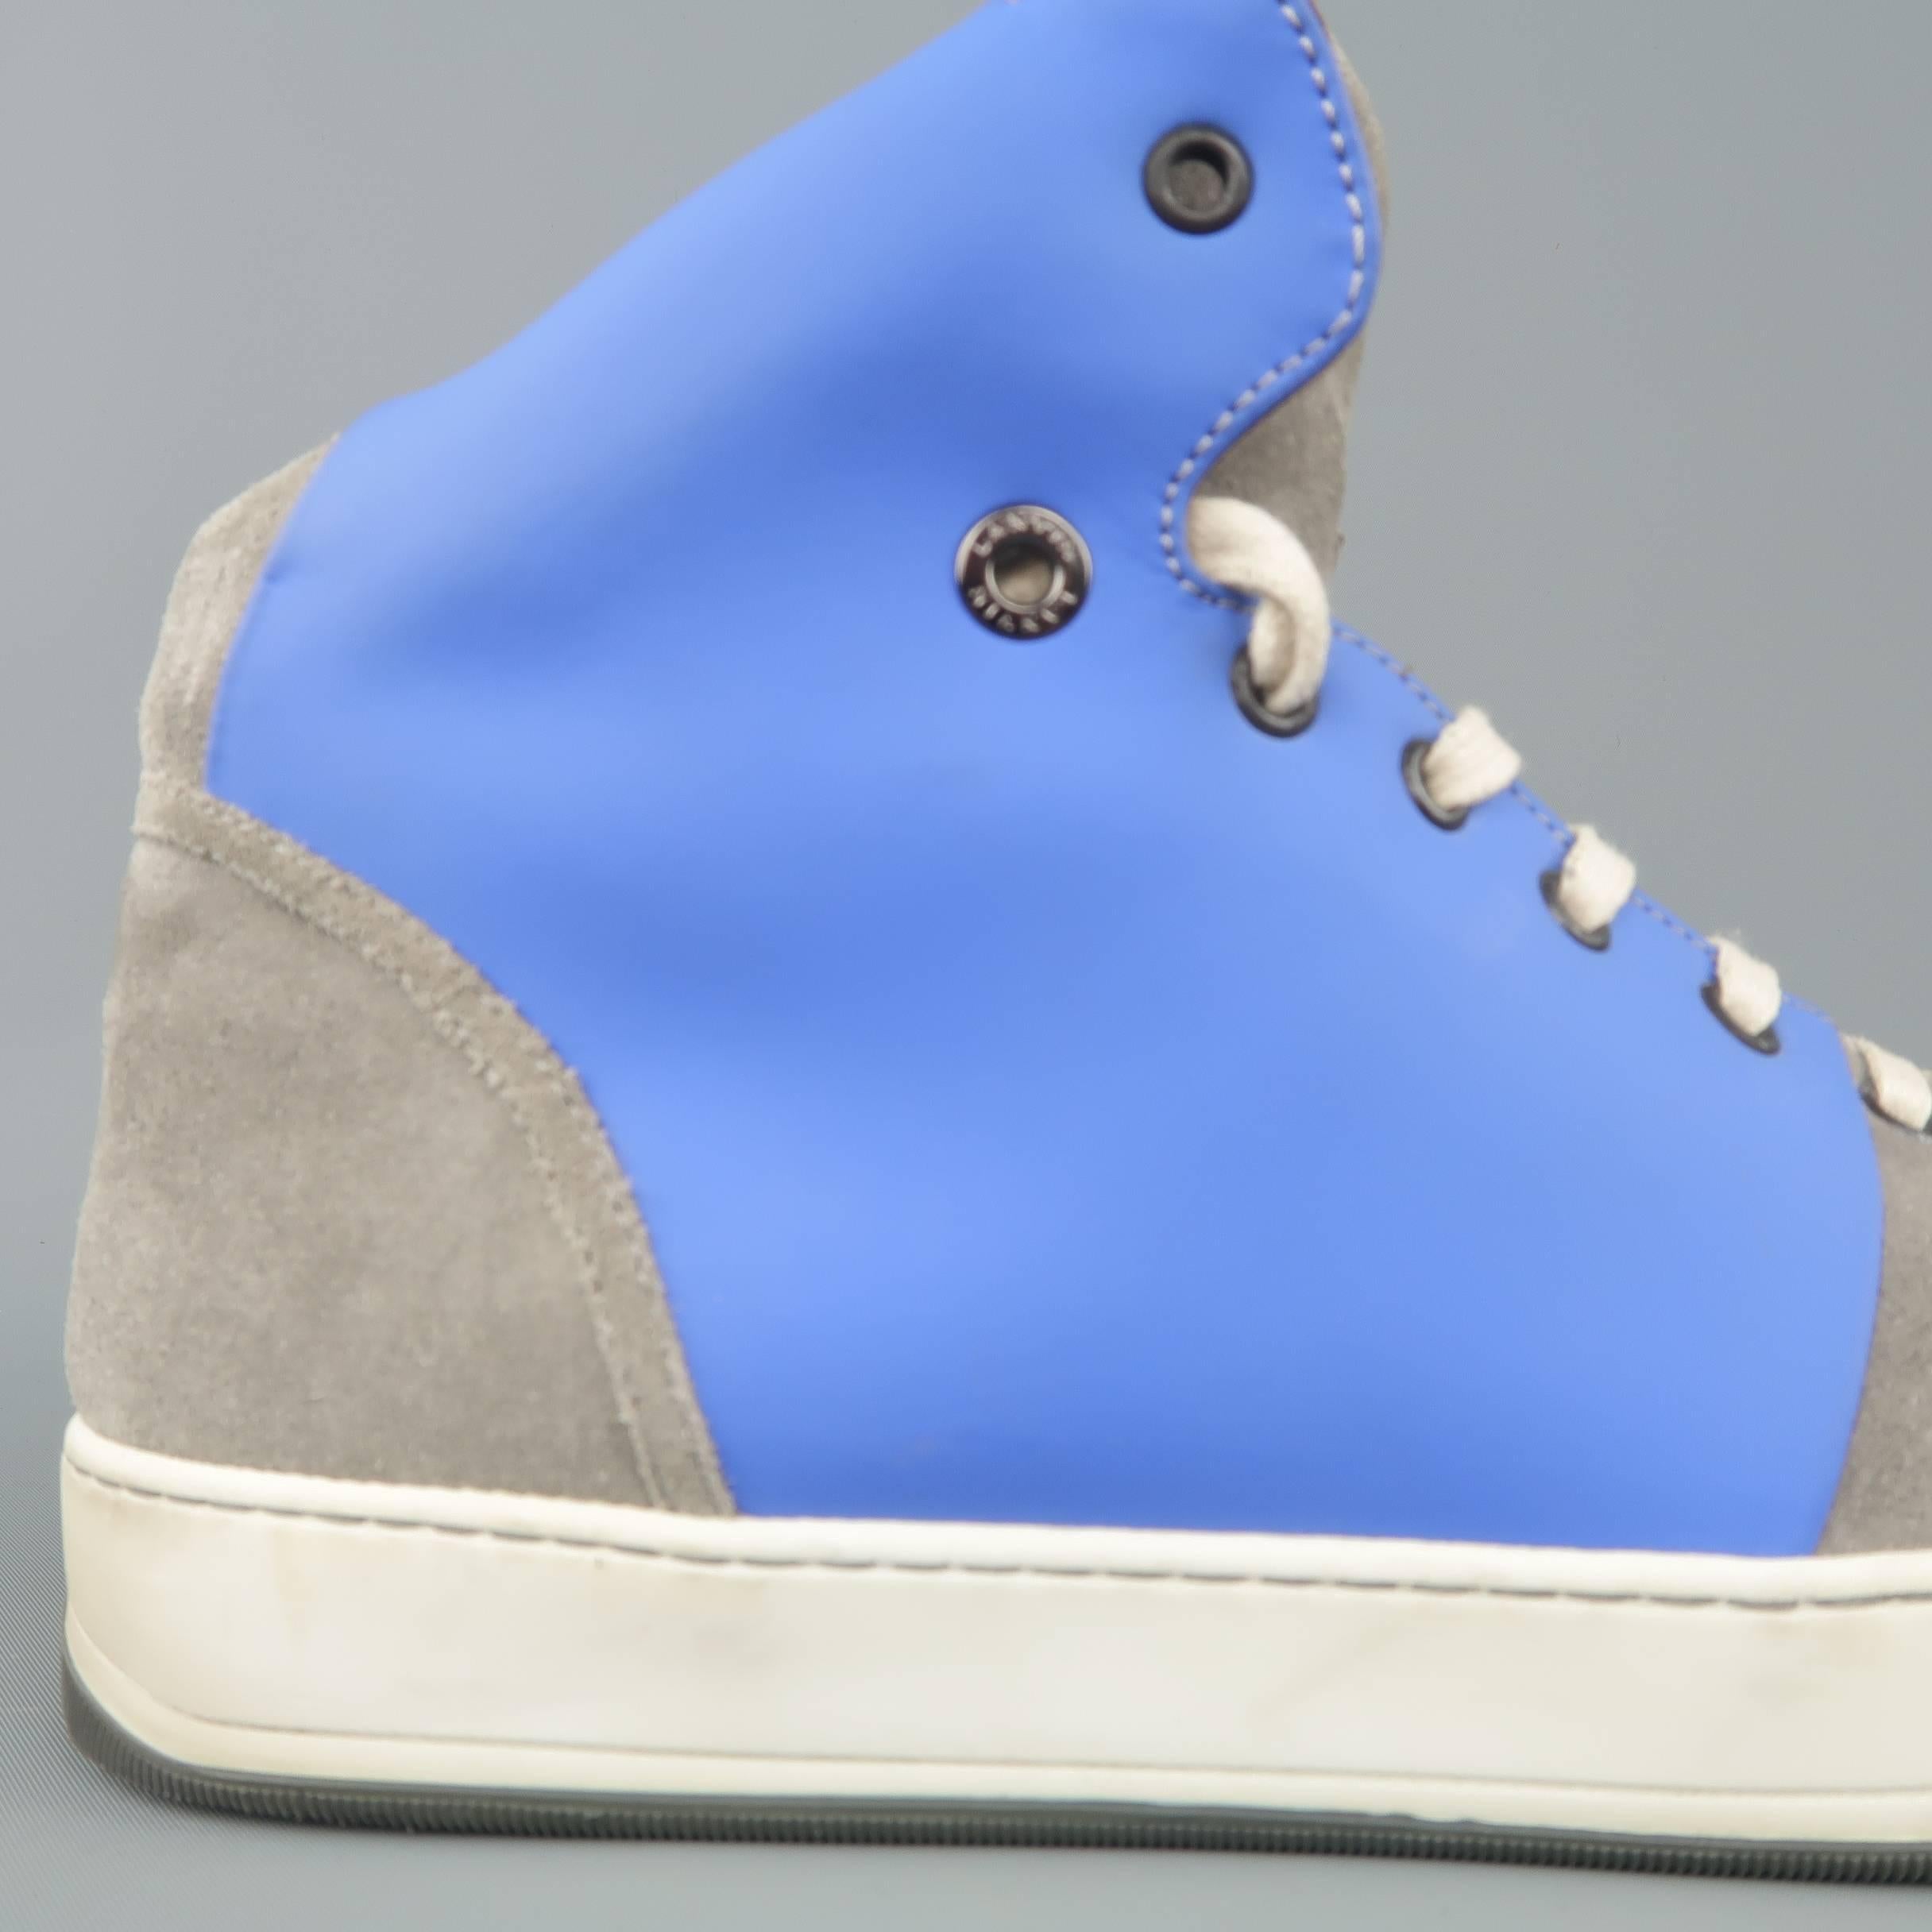 LANVIN high top sneakers come in light gray suede and features a lace up front with dark grommets, light royal blue rubber side panels, and two tone rubber sole. Min or wear. With Box. Made in Italy.
 
Good Pre-Owned Condition.
Marked: UK 7
